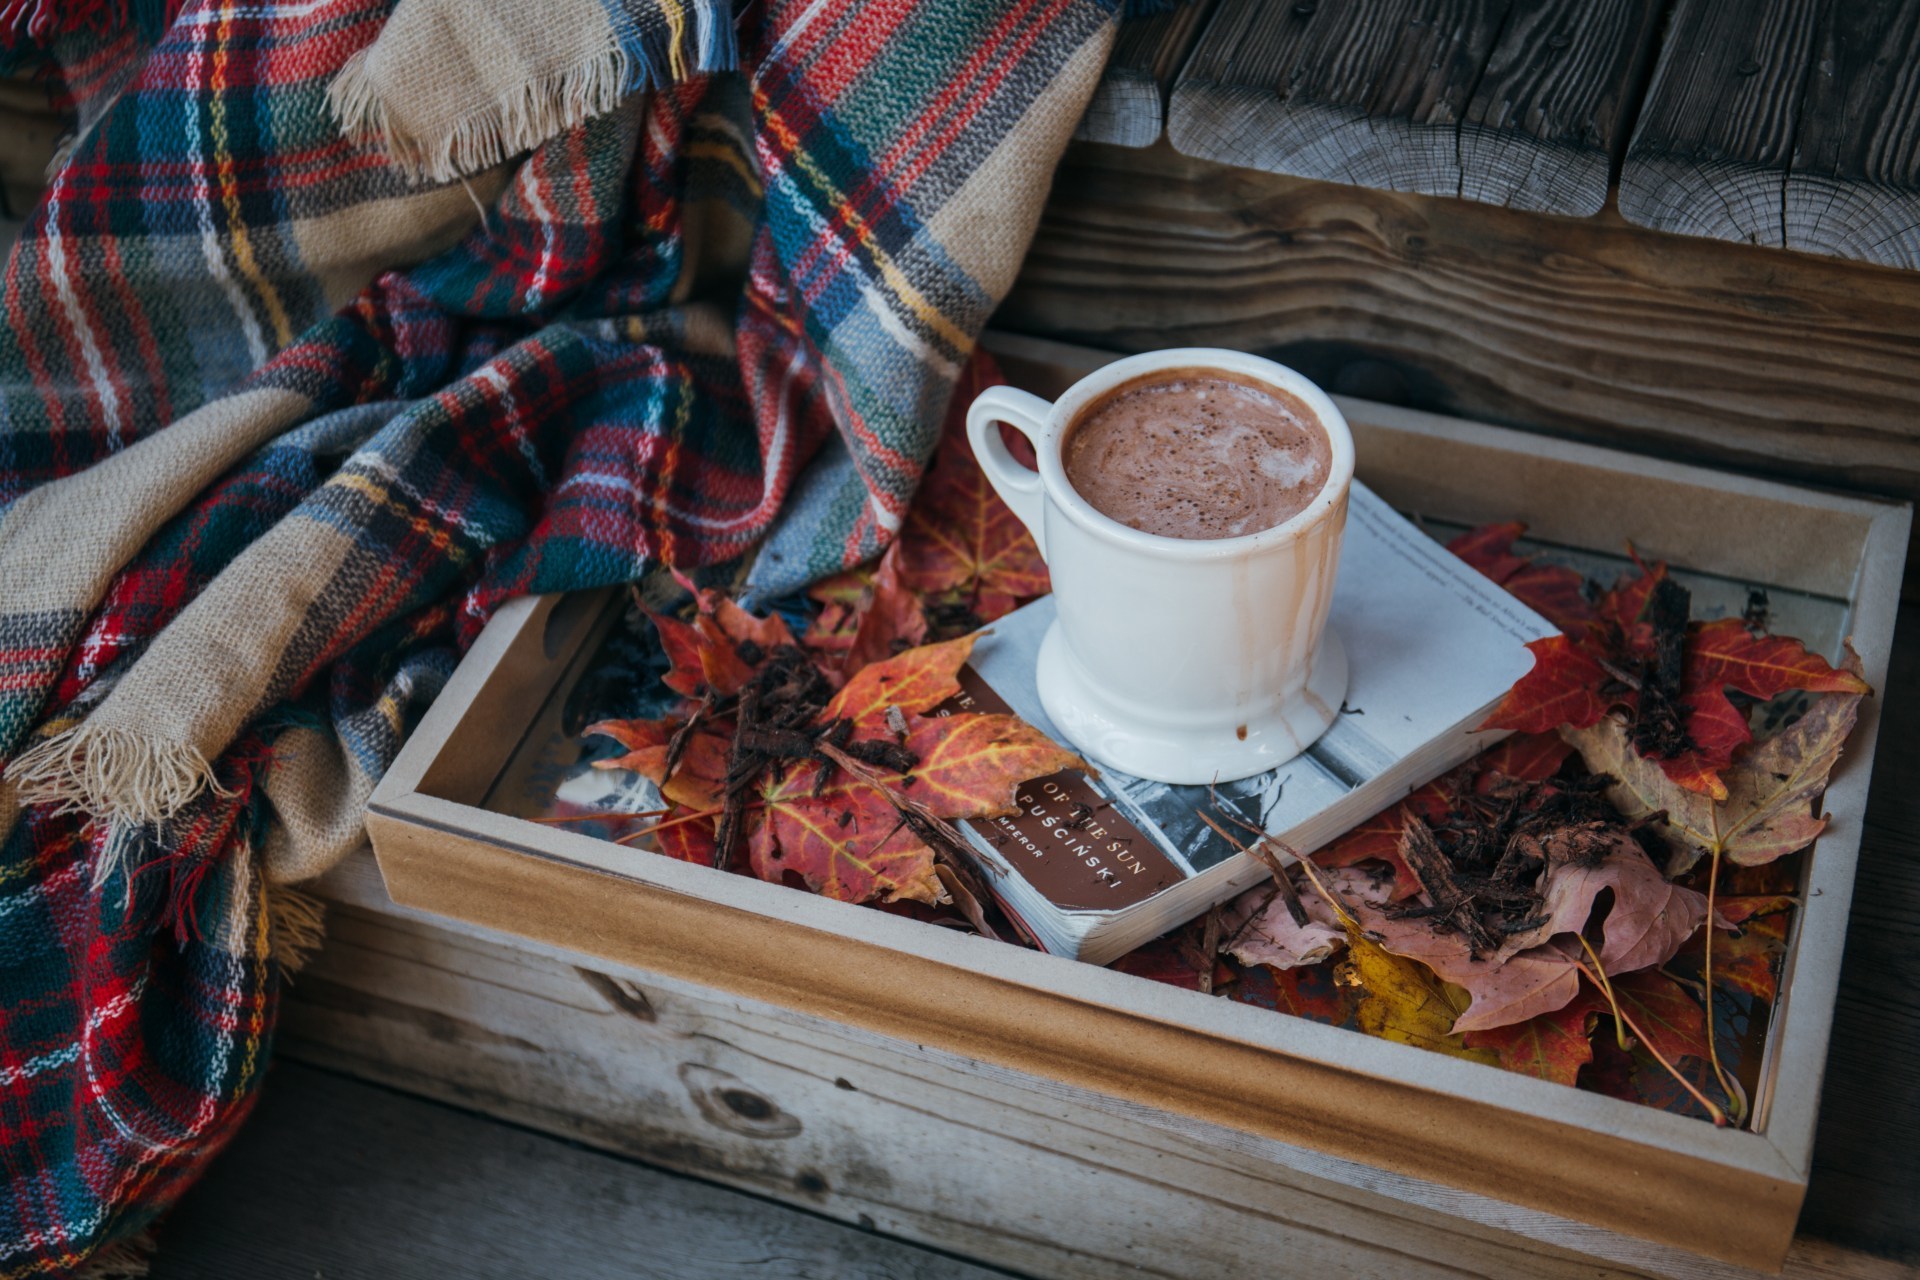 A cozy fall scene with a plaid blanket, hot chocolate, and fall leaves on a wood tray